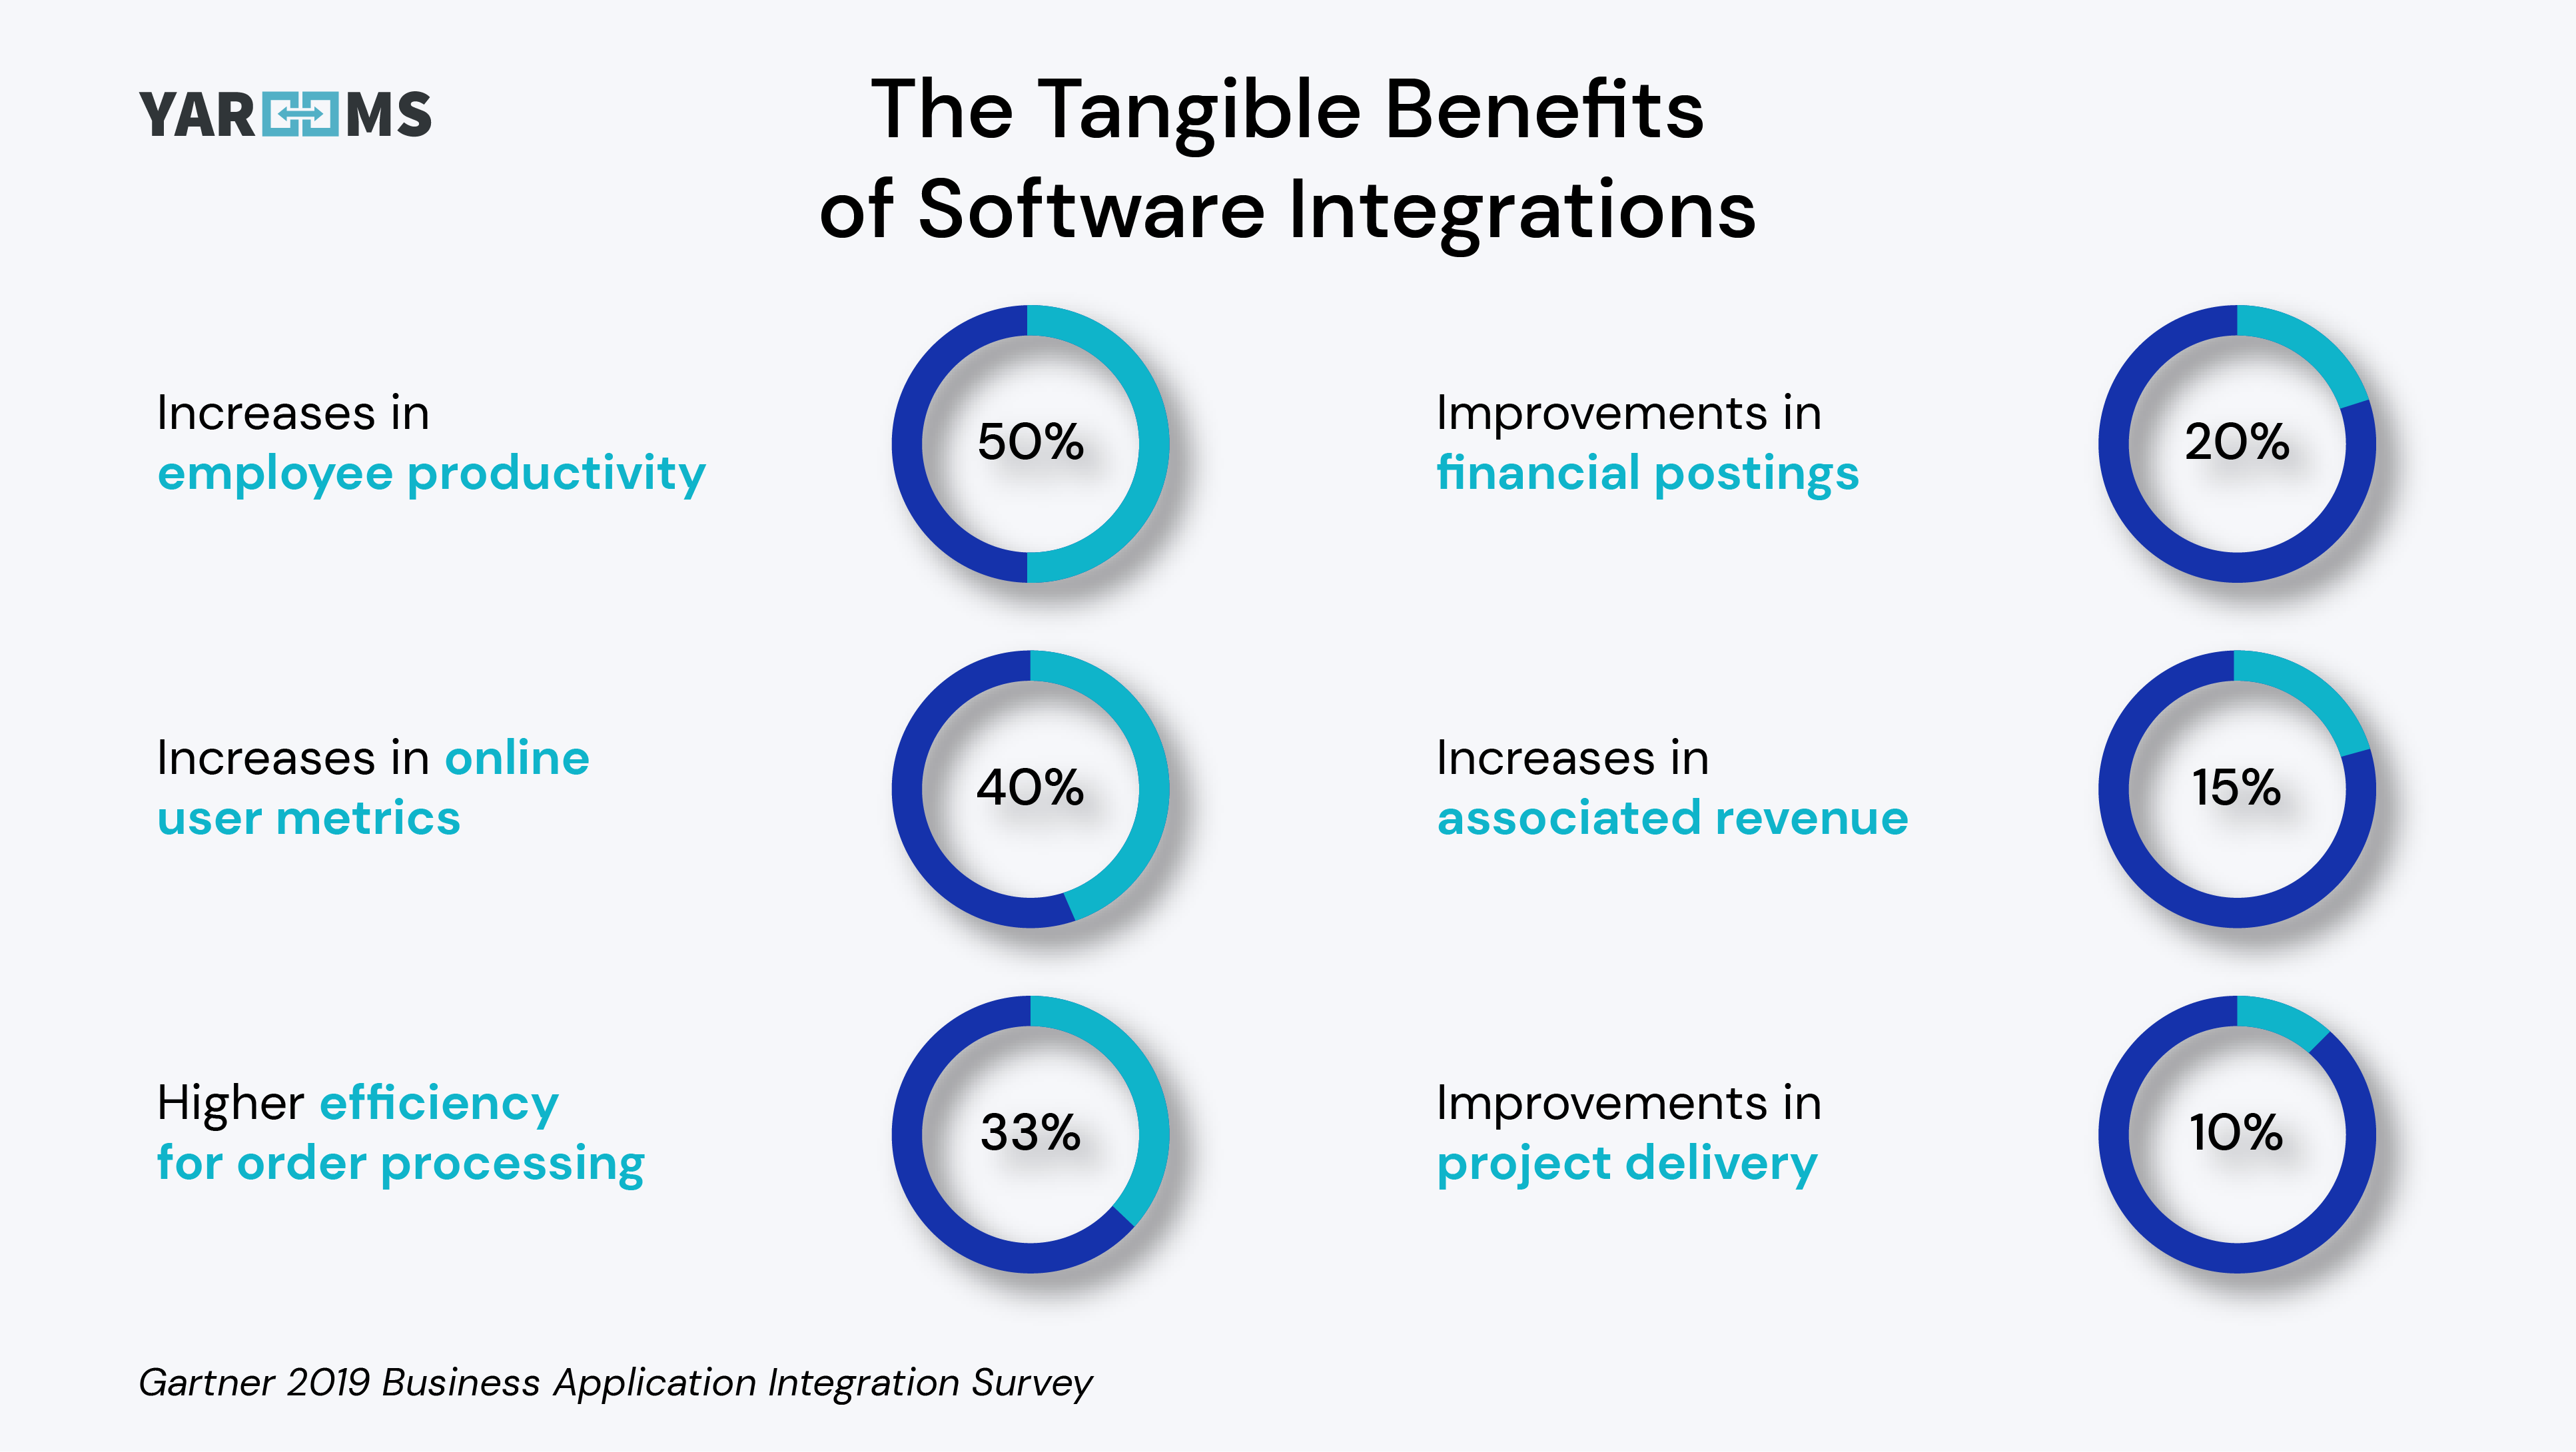 The tangible benefits of software integrations